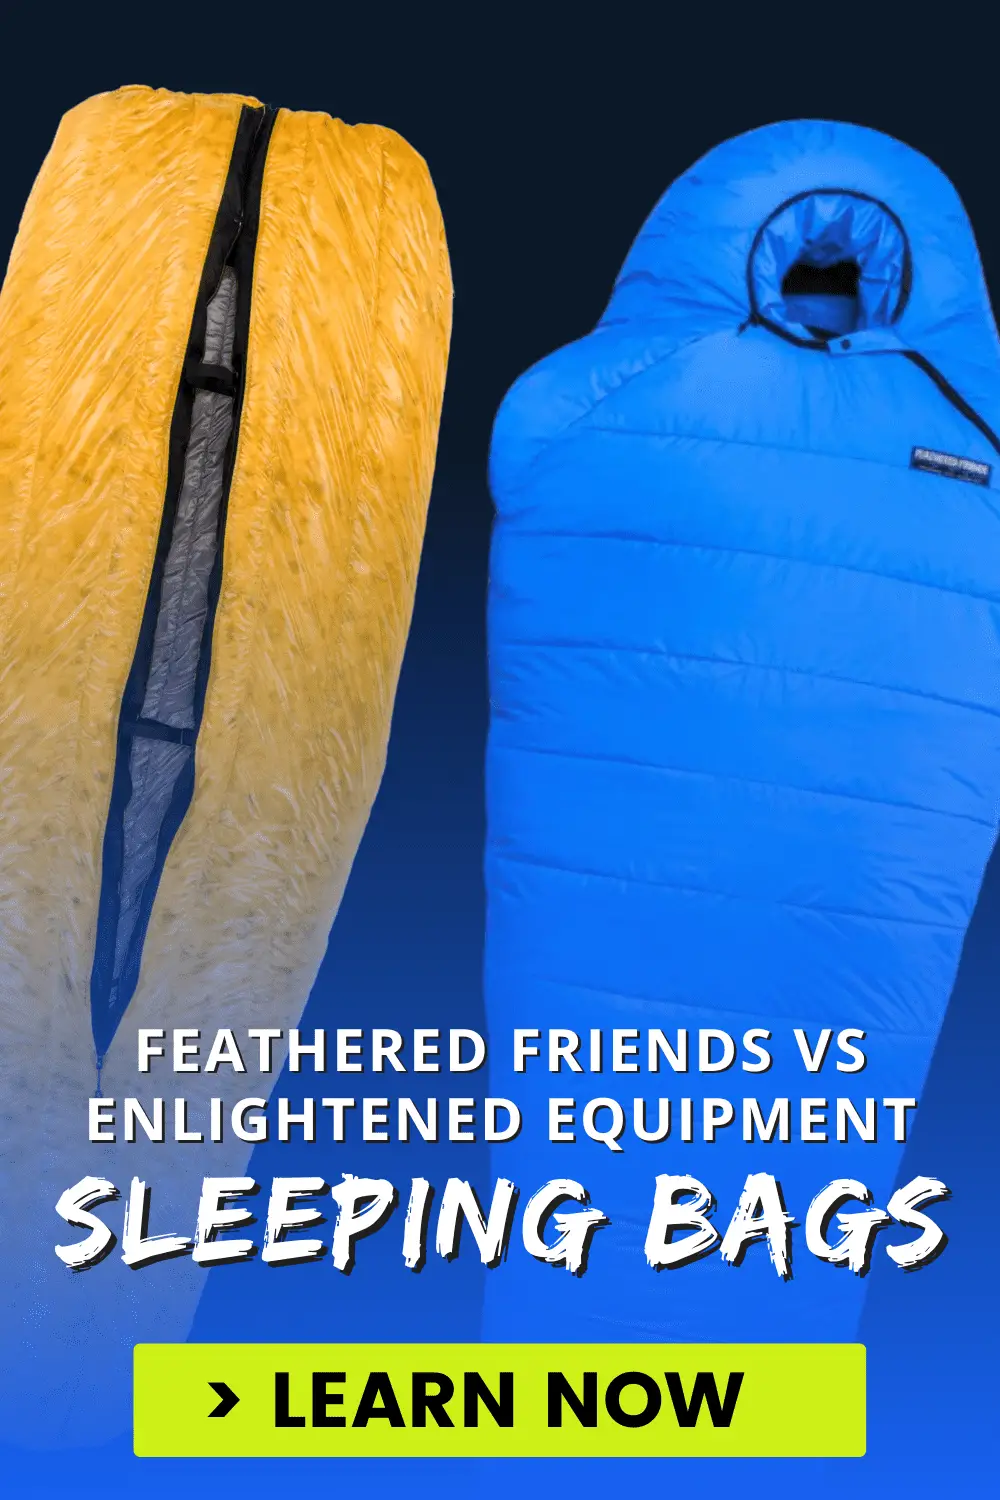 FEATHERED FRIENDS VS ENLIGHTENED EQUIPMENT